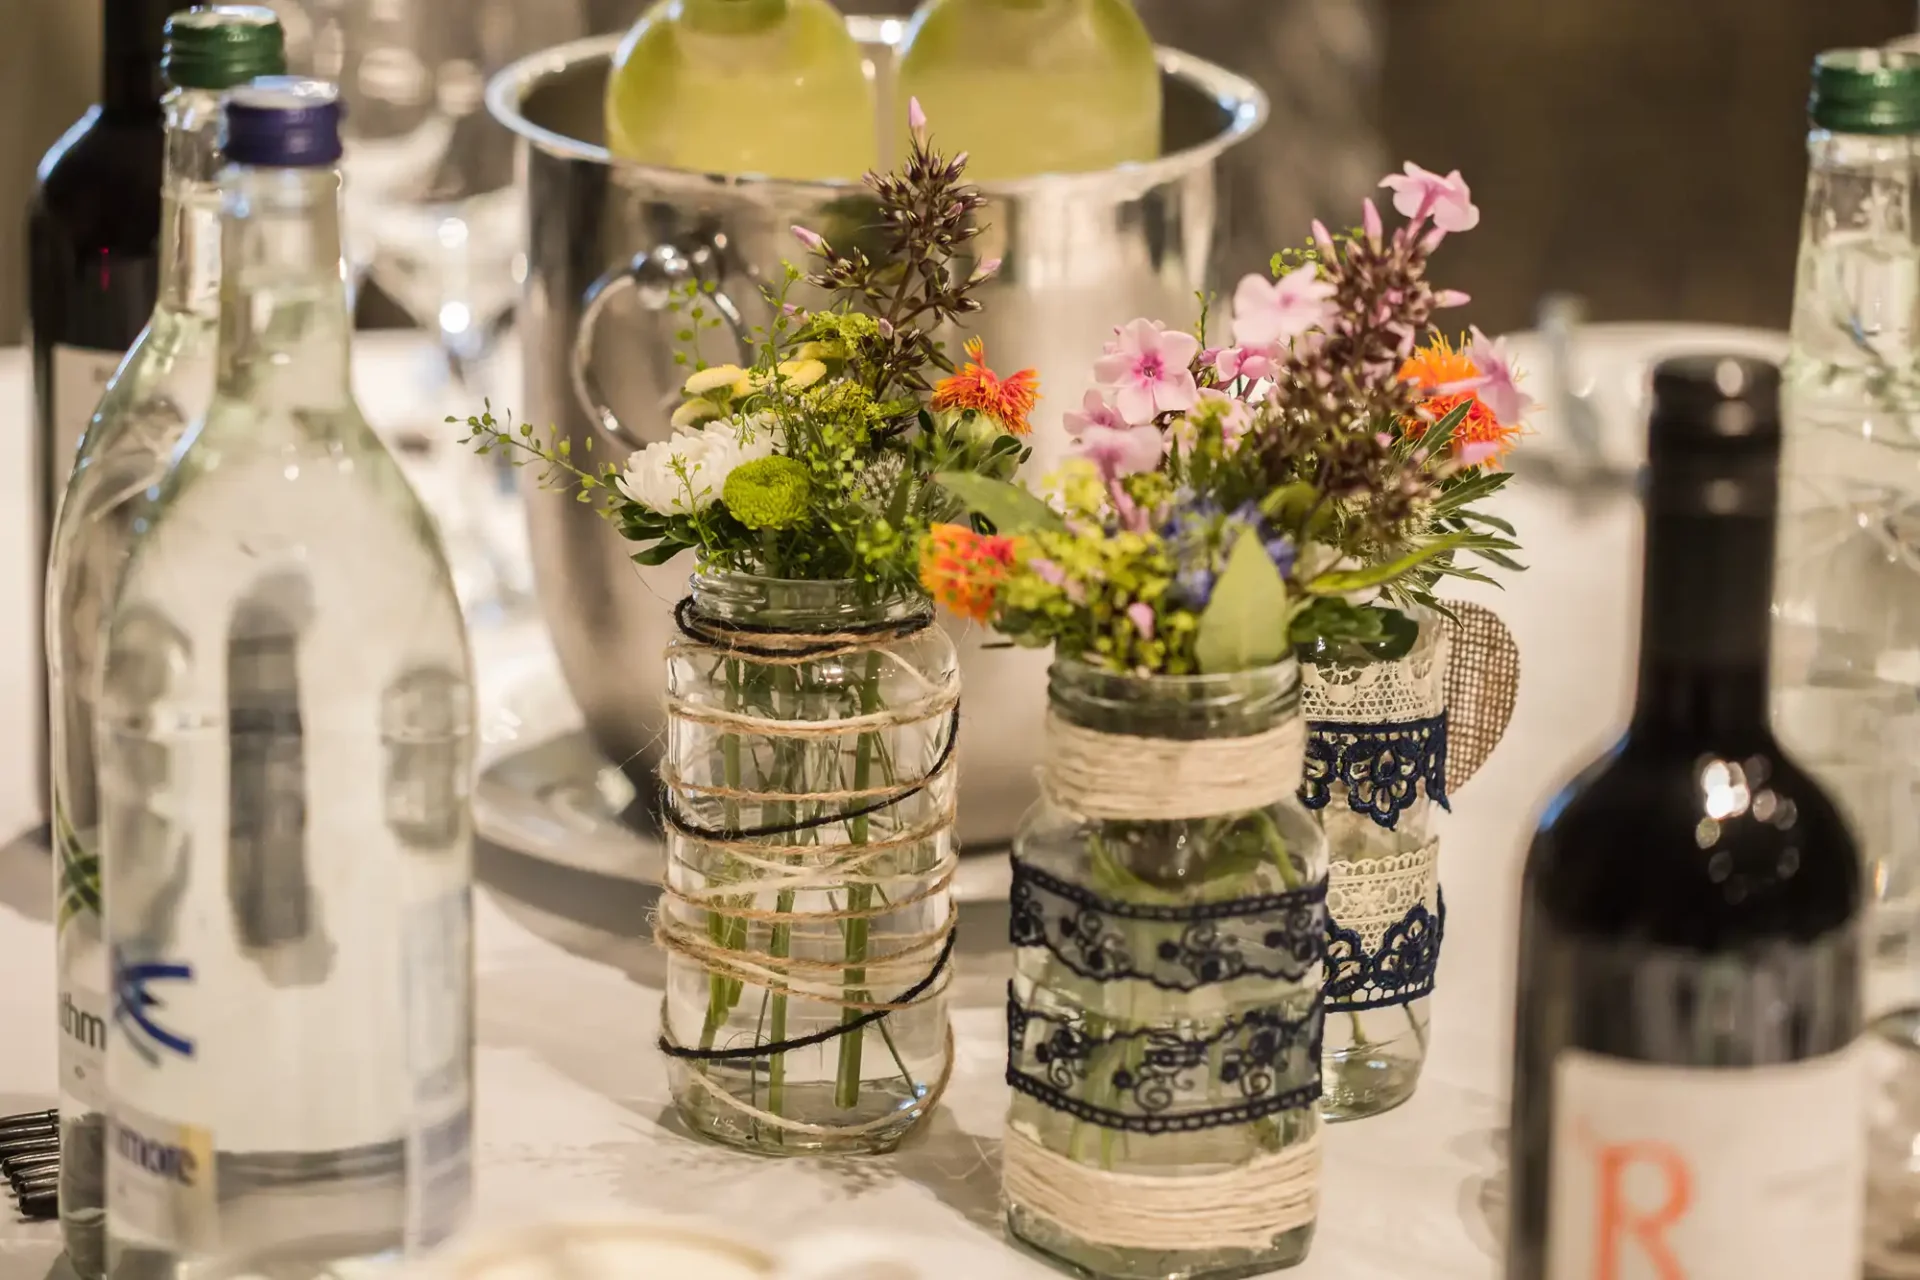 Table setting featuring small floral arrangements in glass jars, surrounded by bottles of water and wine, with a backdrop of dishware.